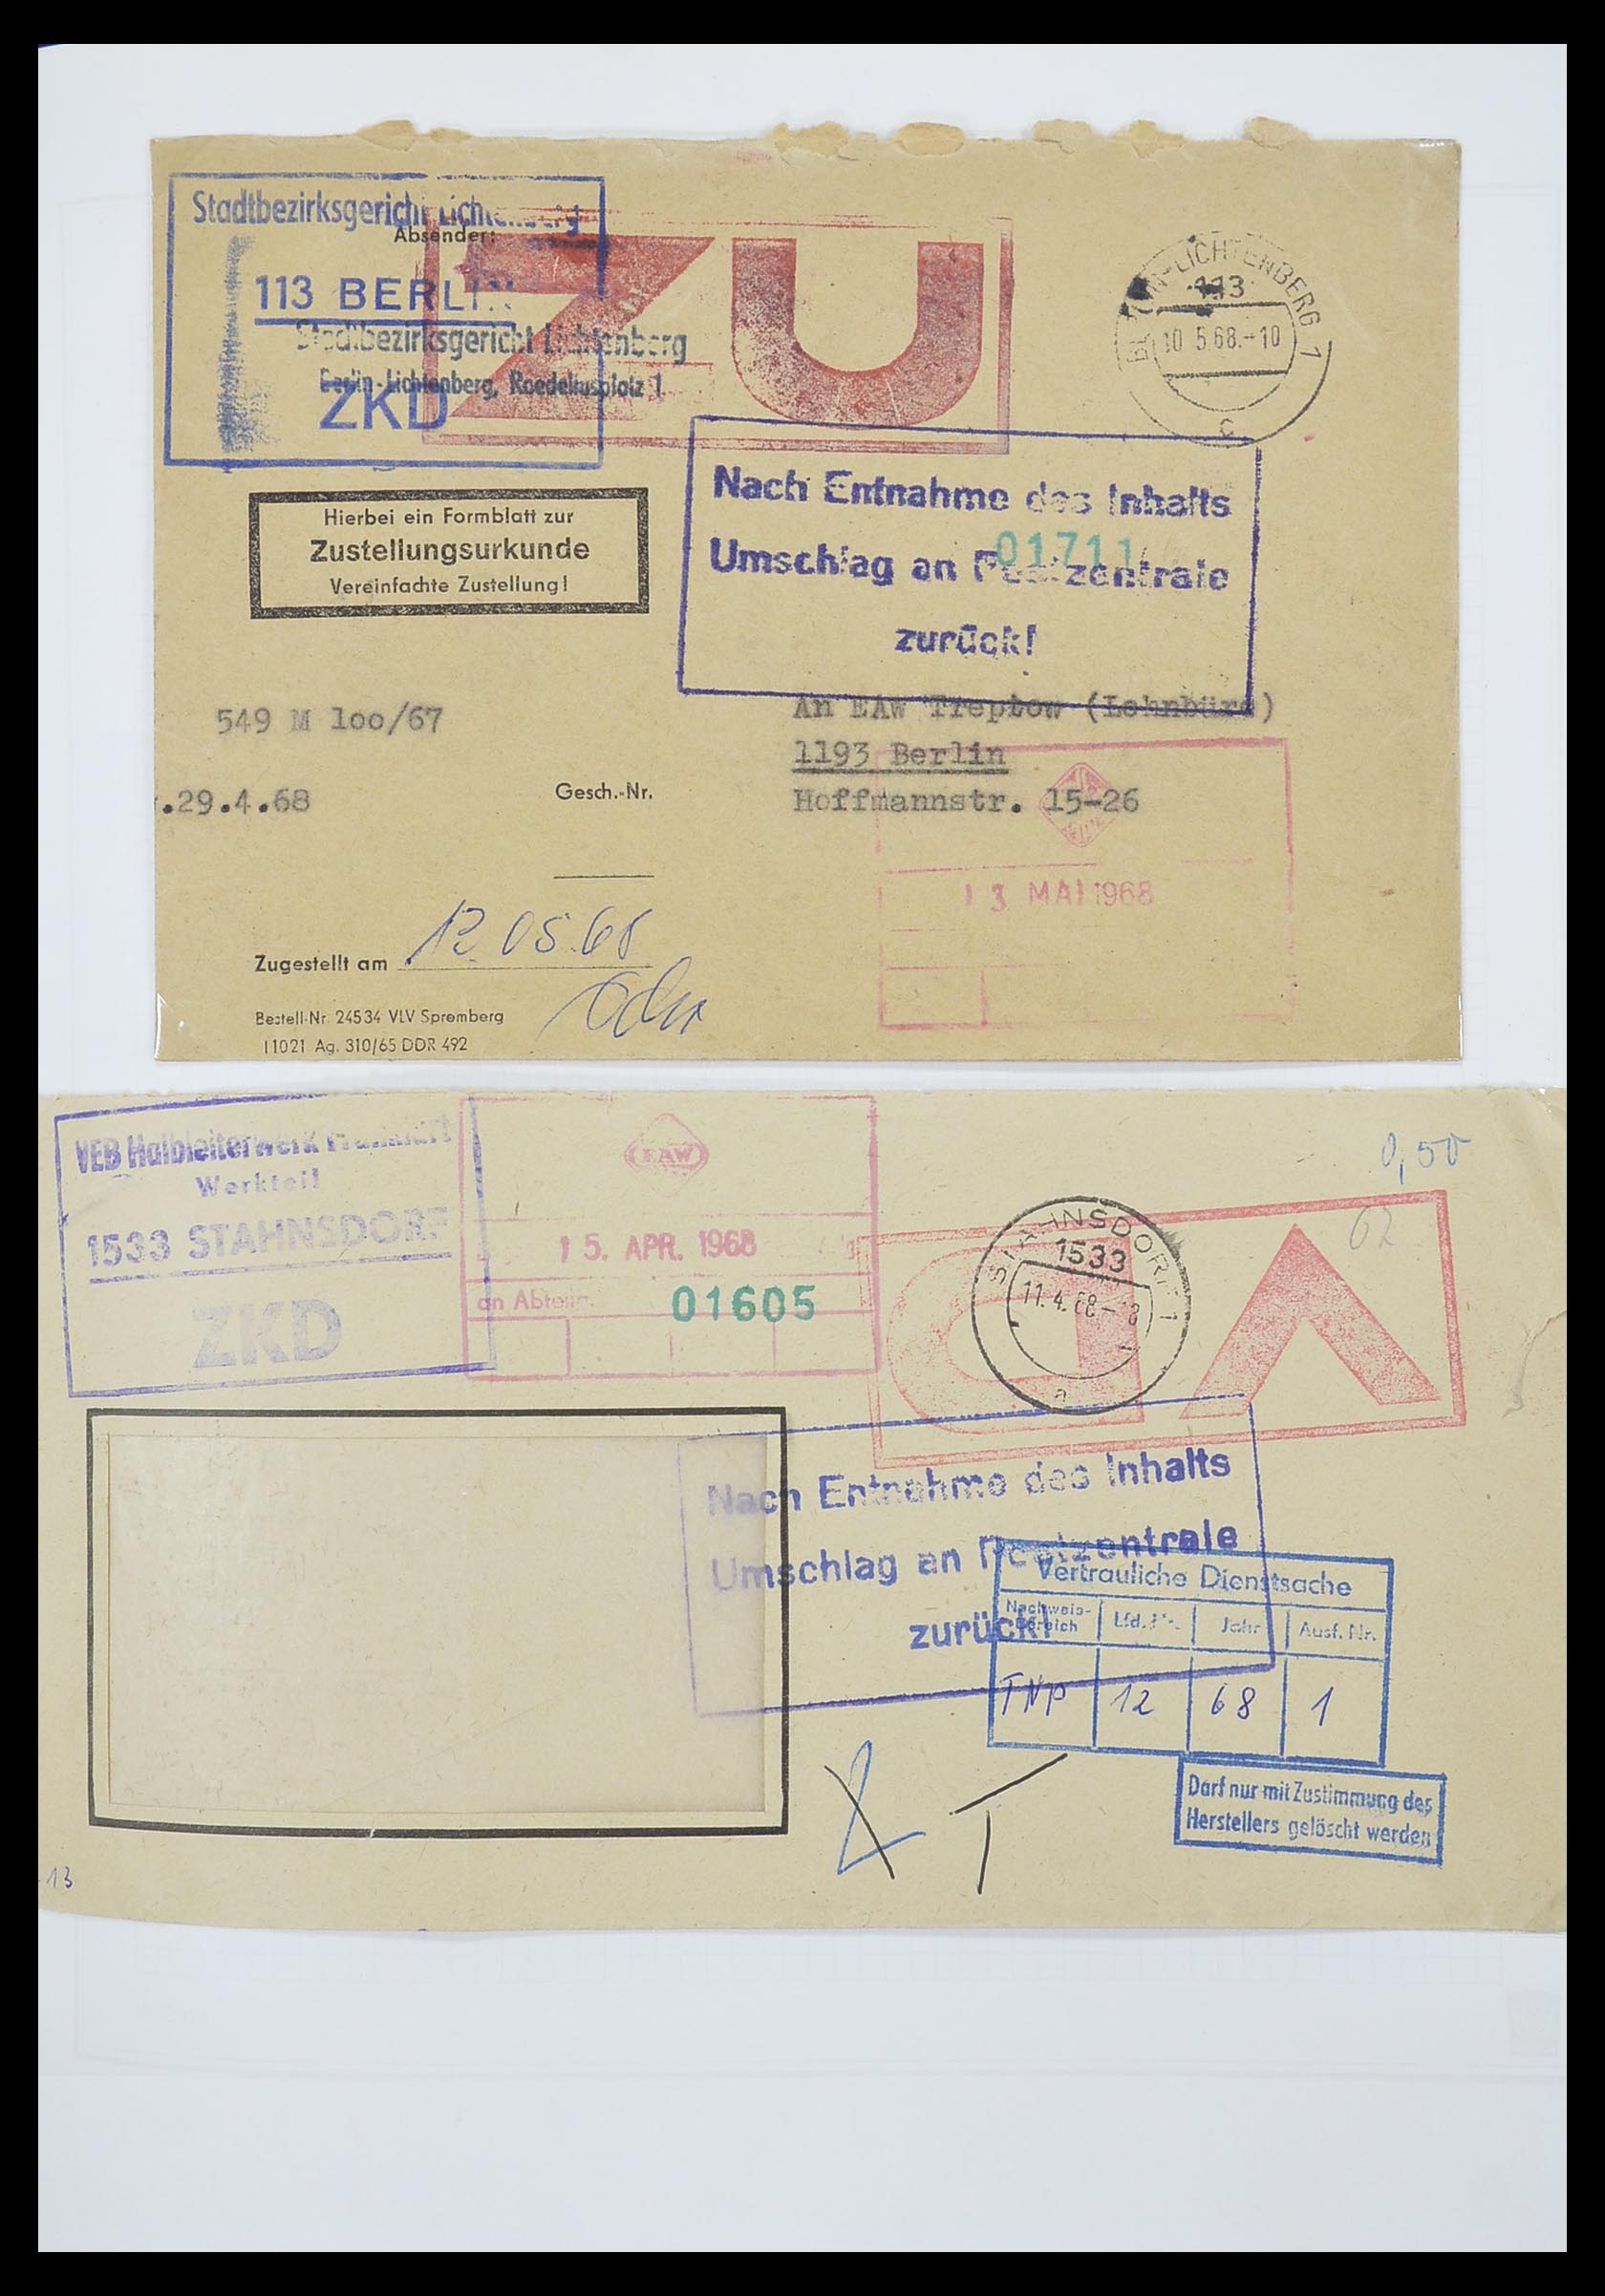 33883 033 - Stamp collection 33883 DDR service covers 1956-1986.